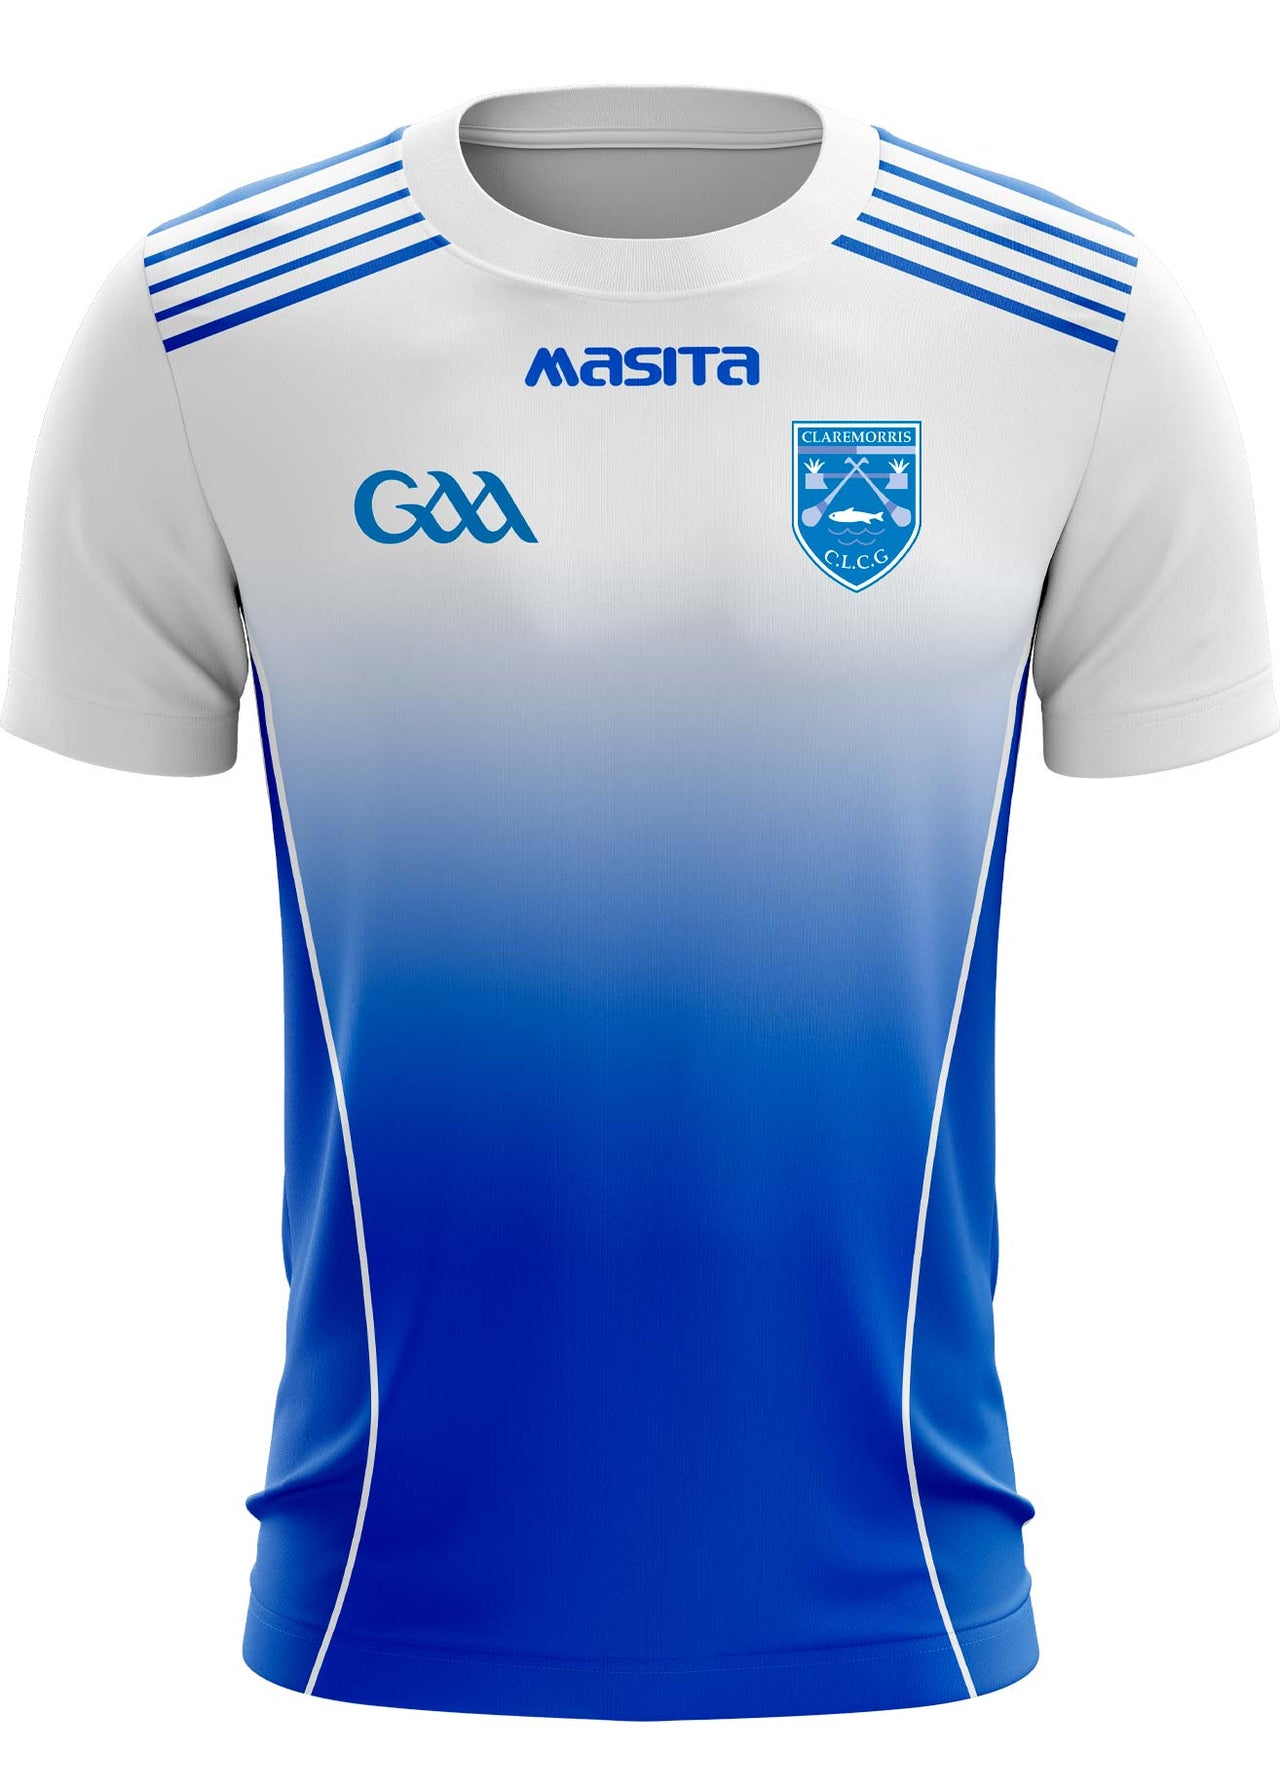 Claremorris HC Training Jersey Player Fit Adult